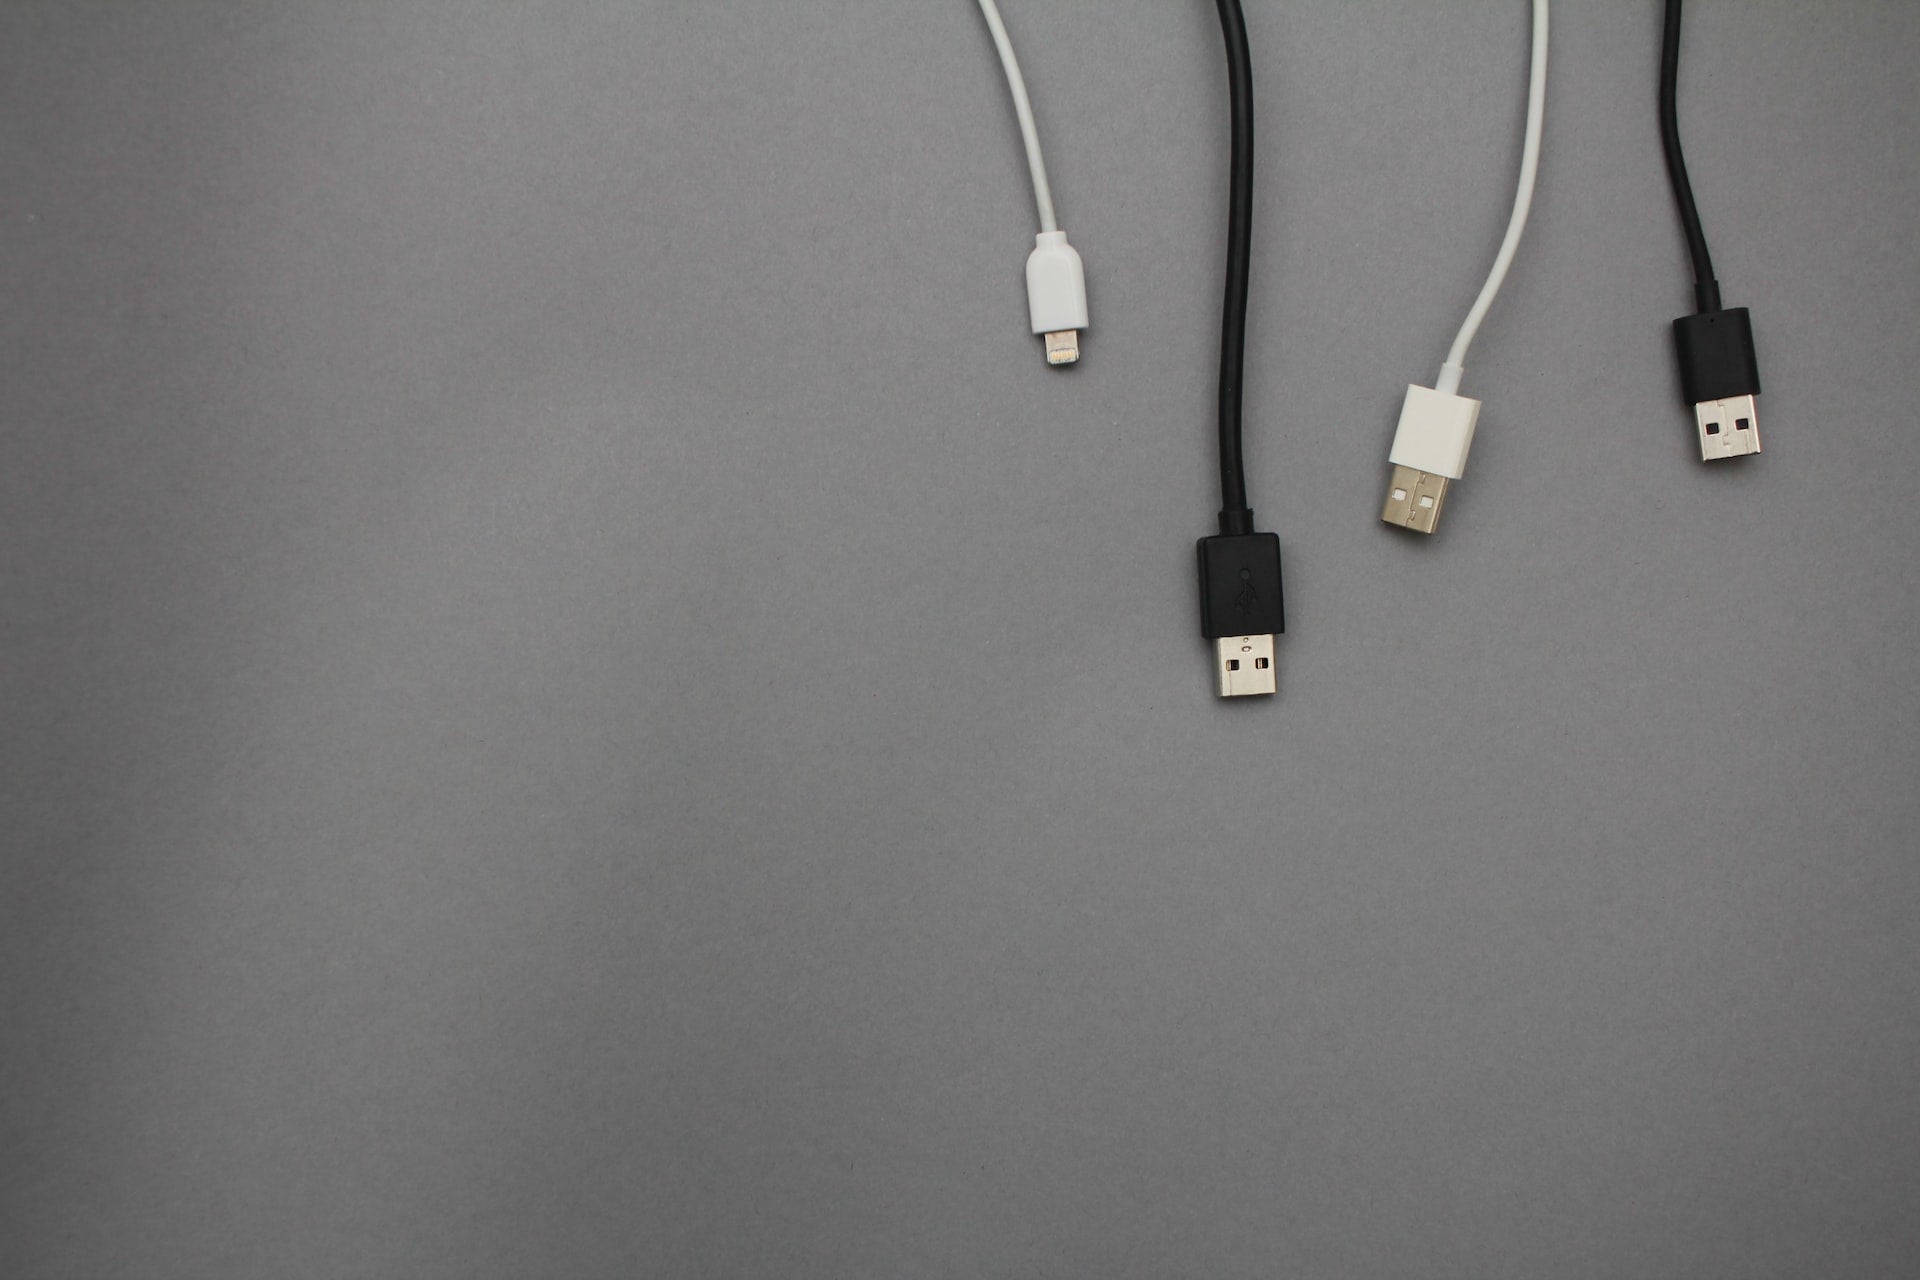 Using the Wrong Charger Could Damage or Destroy Your iPhone